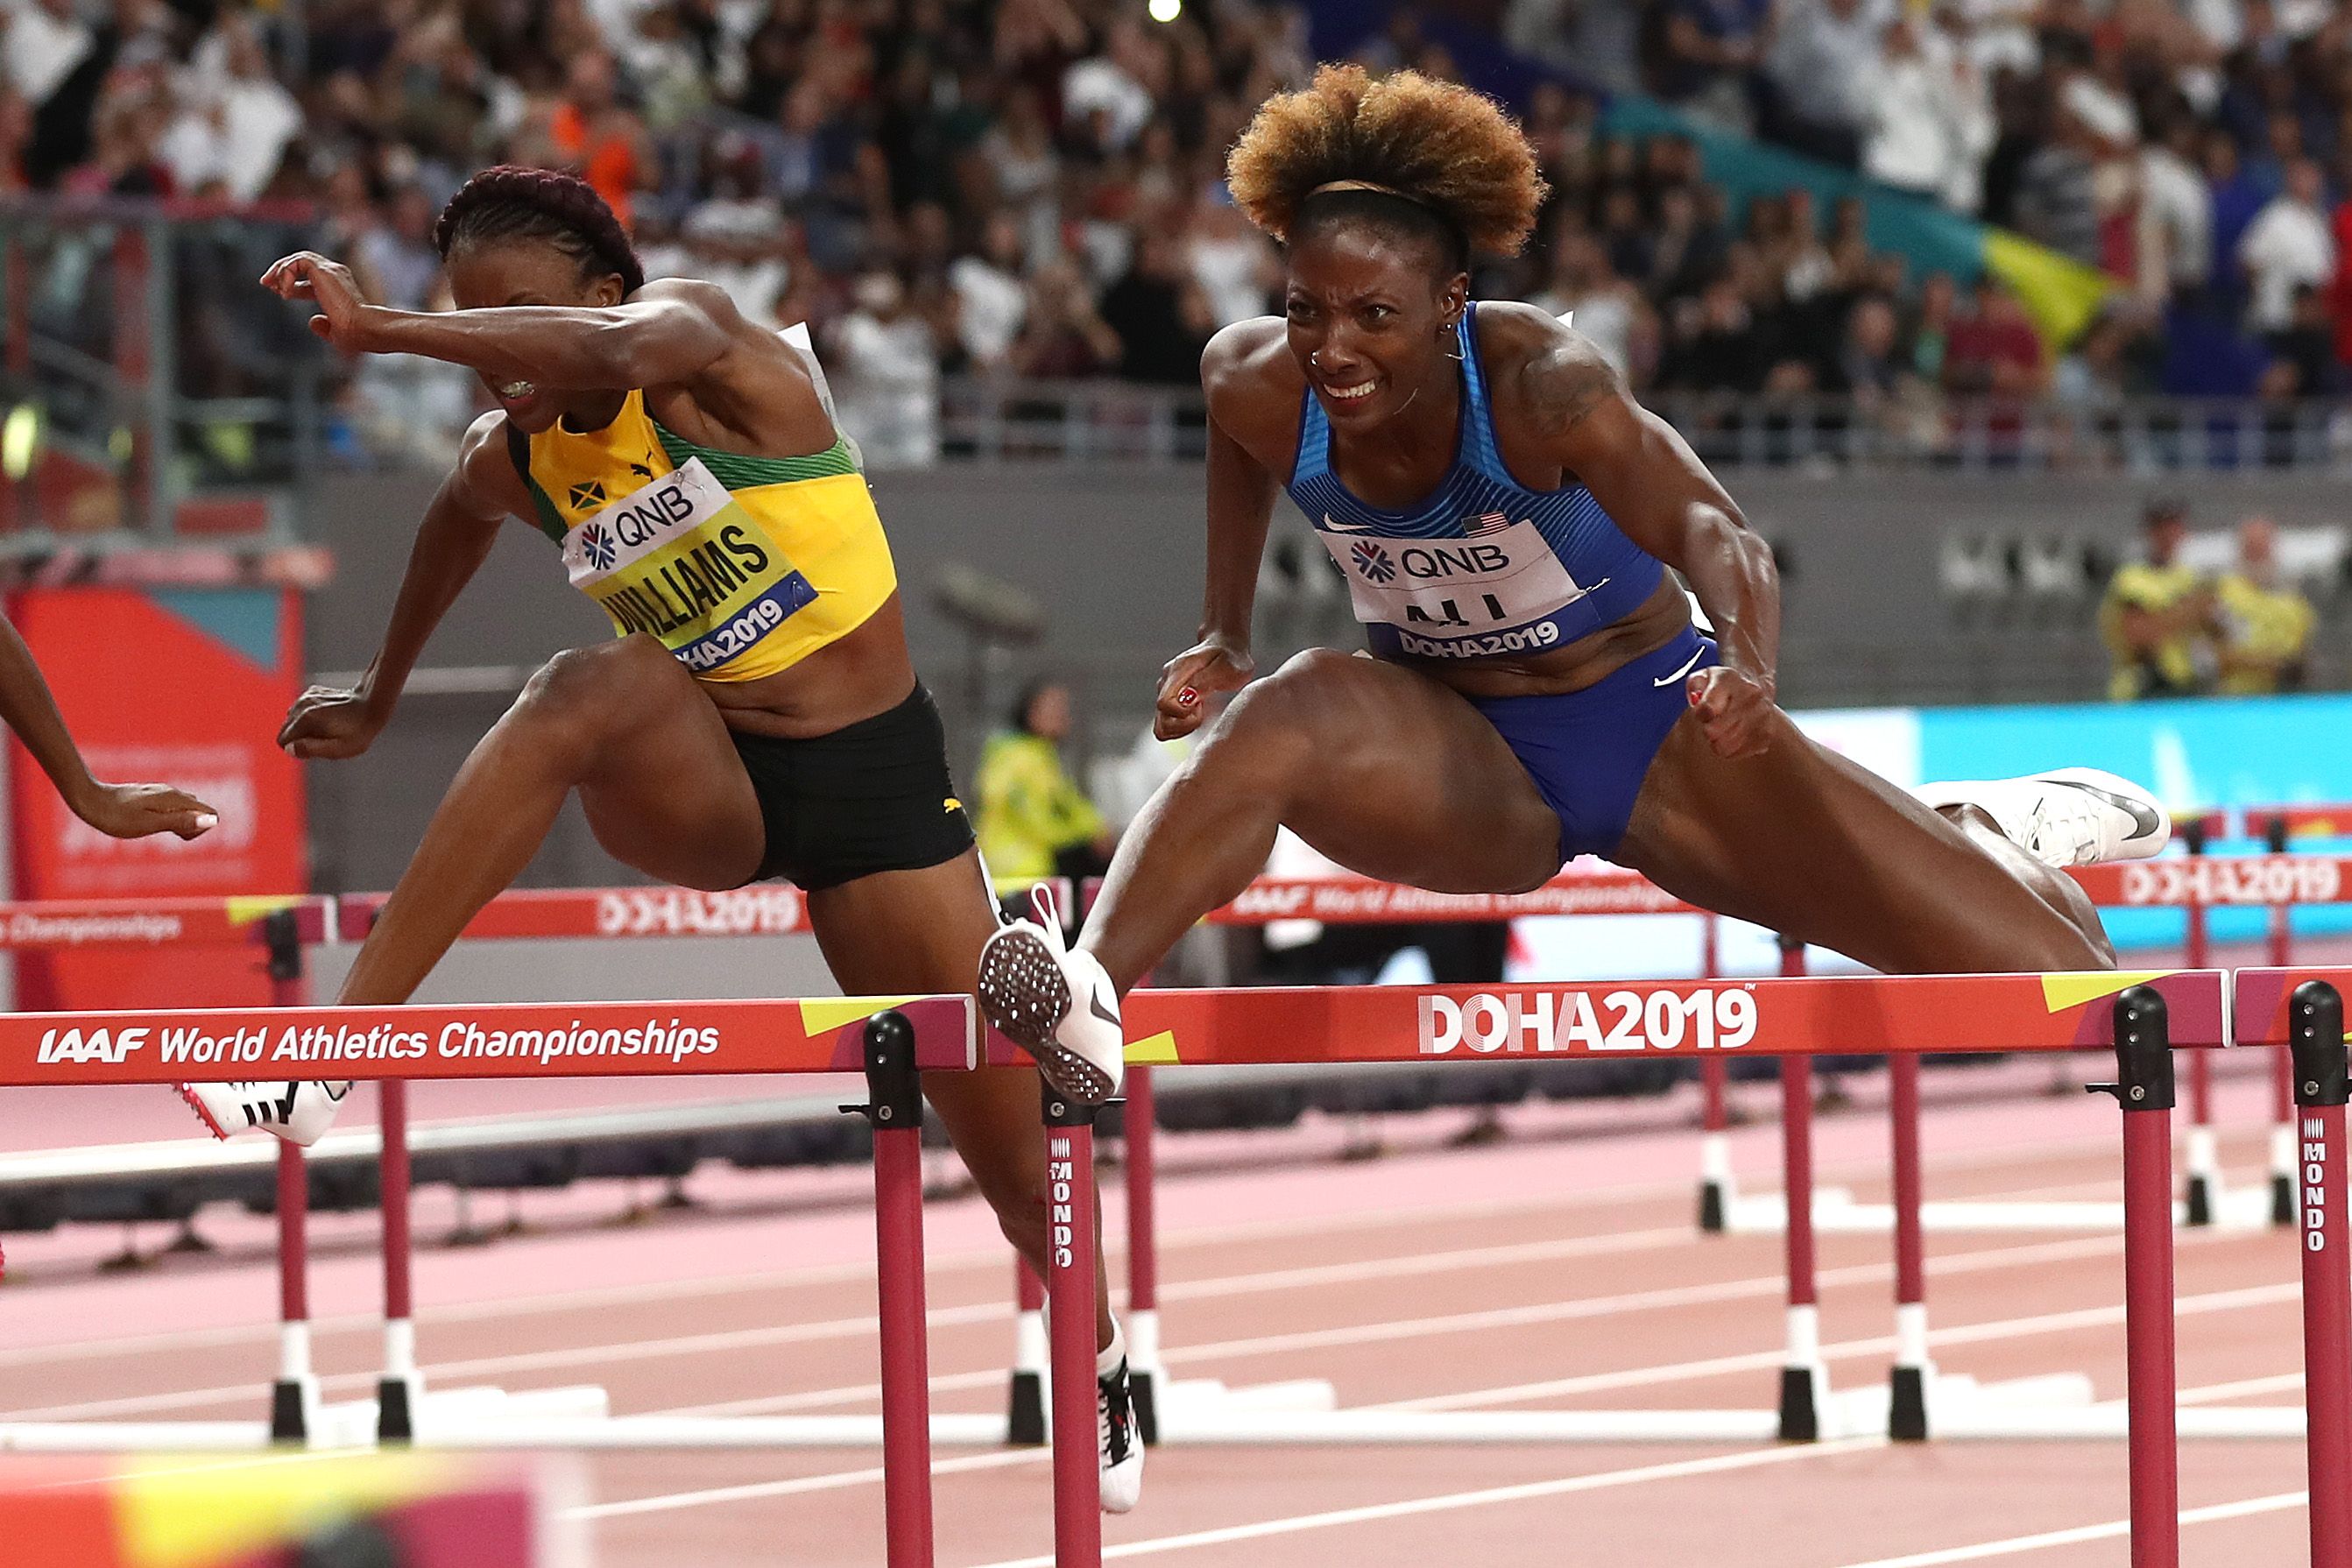 Nia Ali on her way to winning the 100m hurdles at the World Athletics Championships Doha 2019